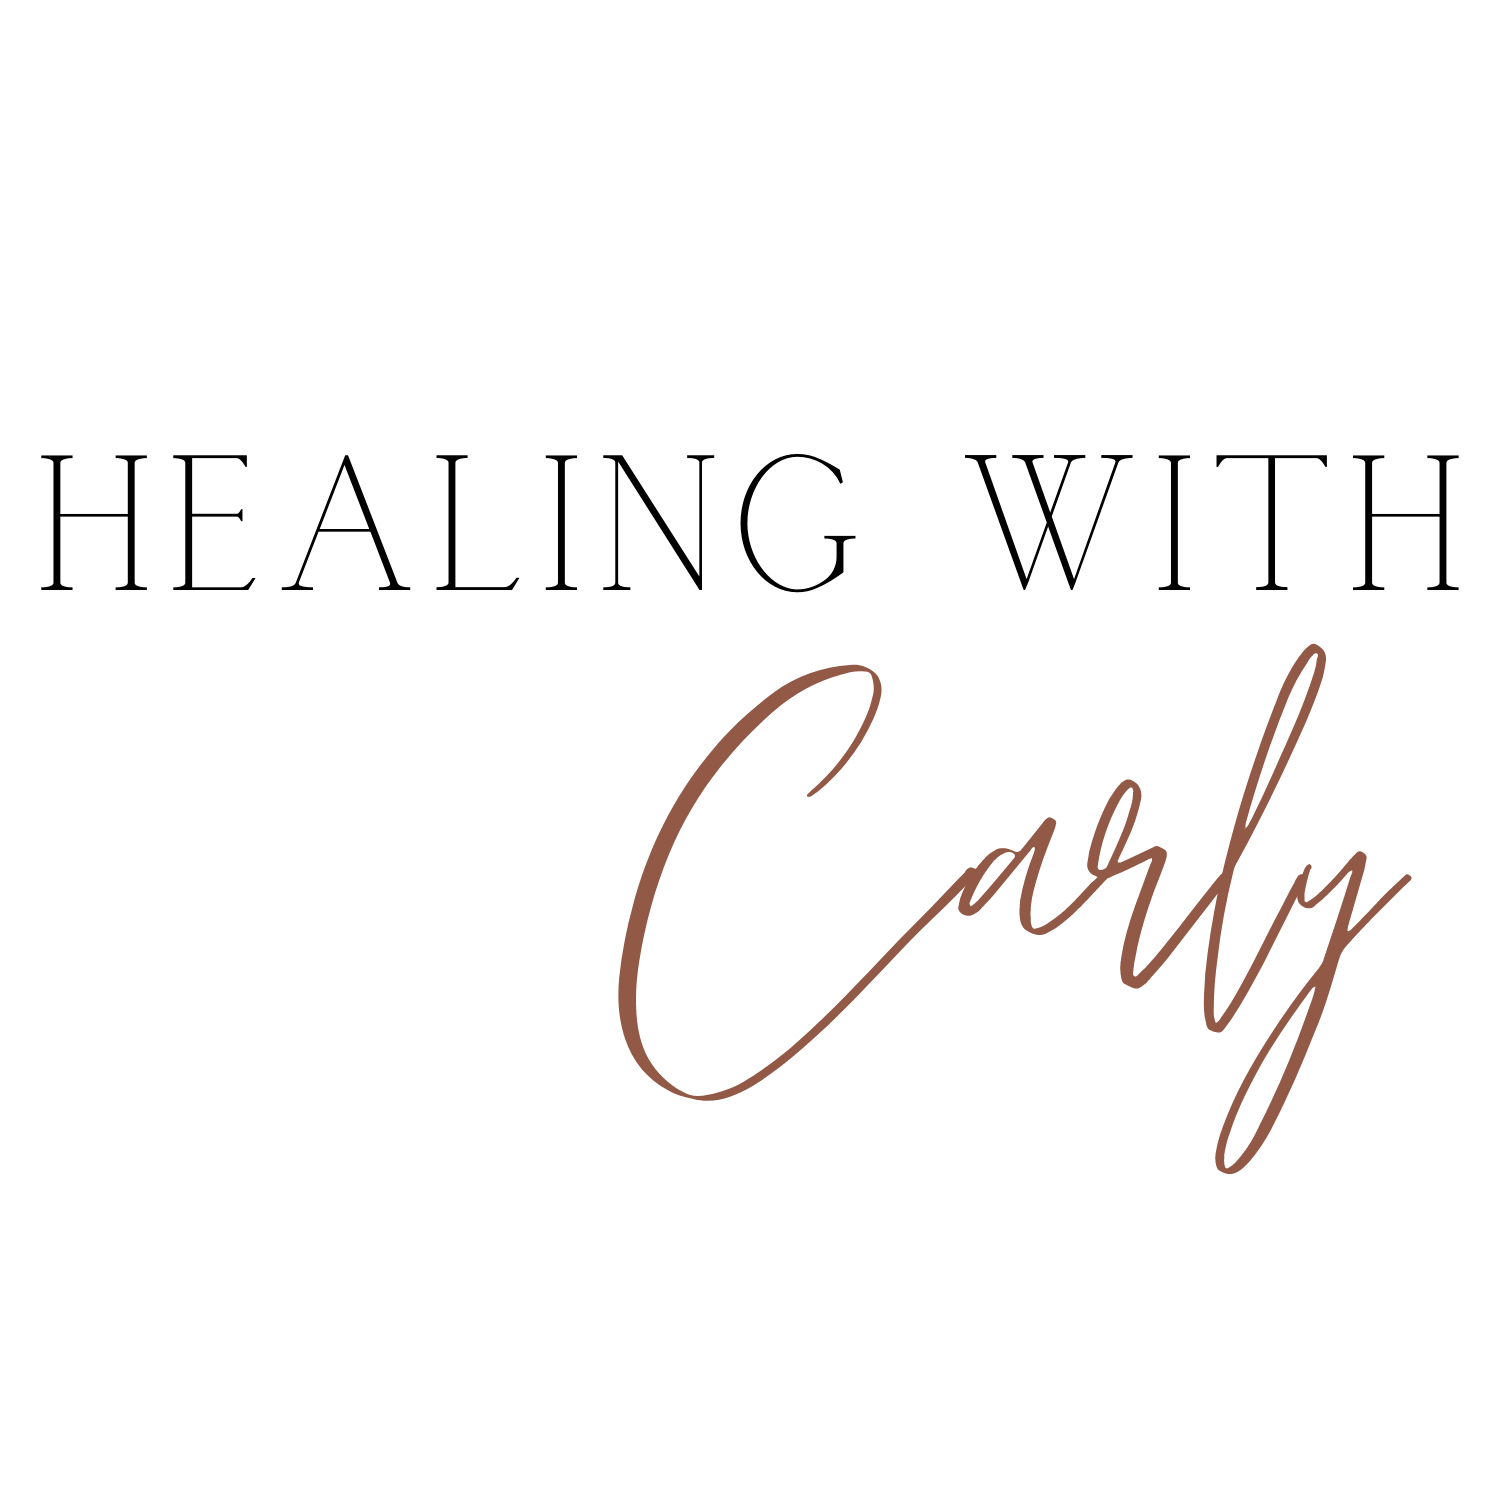 Healing With Carly